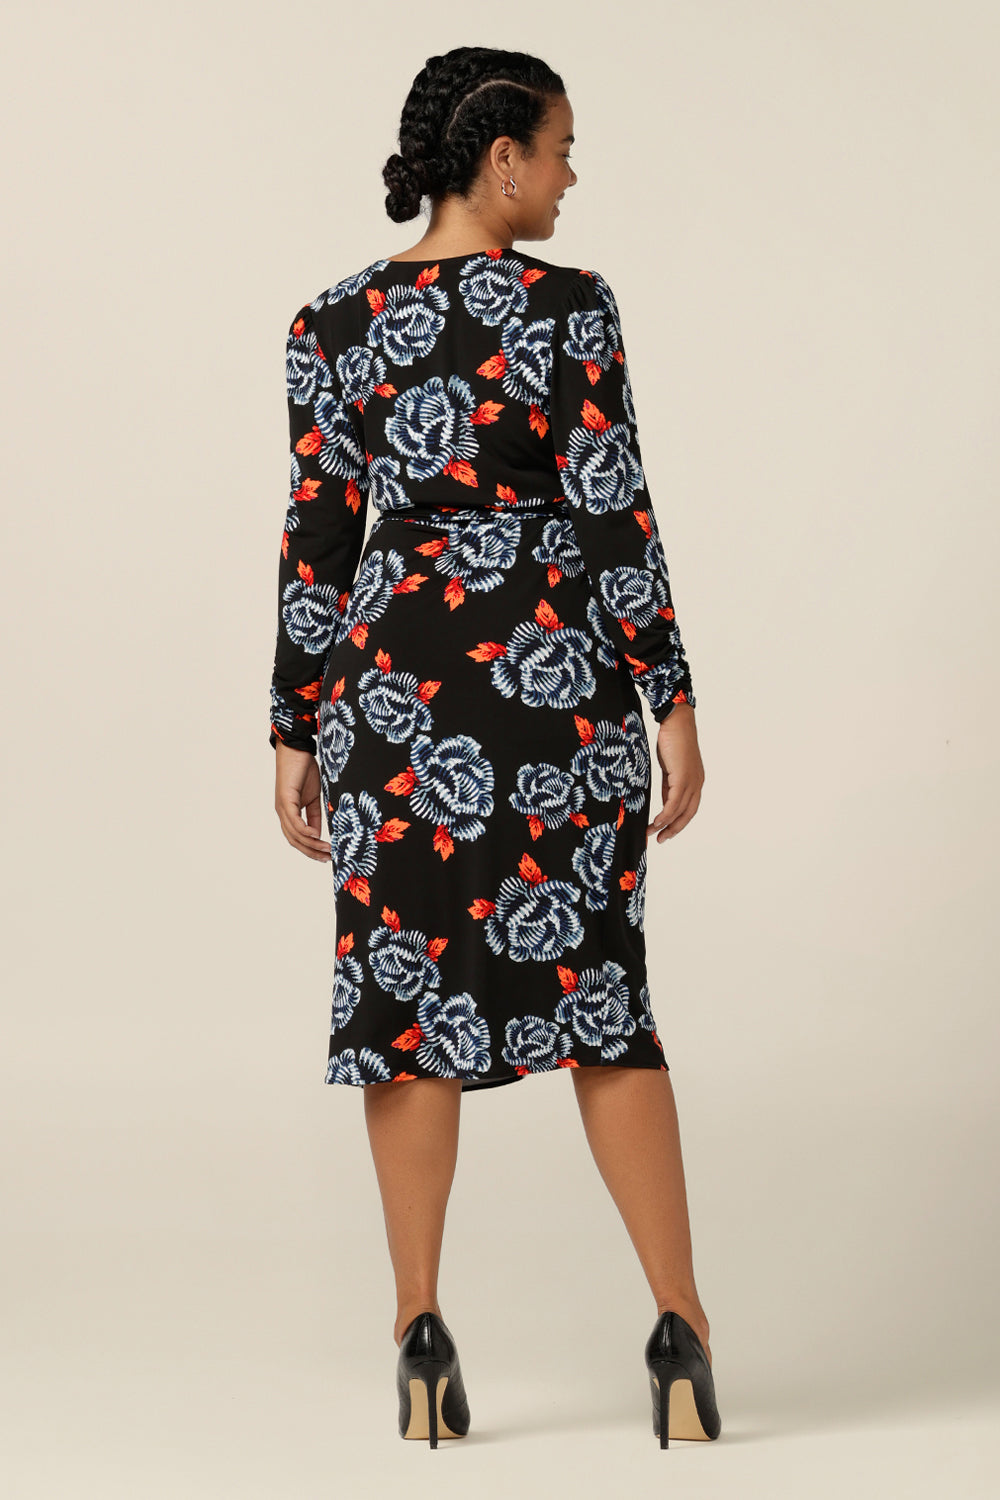 Back view of a jersey wrap dress crafted with Australian-made expertise, this wrap dress features ruched details, flattering tulip skirt and long sleeves. Designed for women in sizes 8 to 24, this dress is good for work wear and smart-casual style.